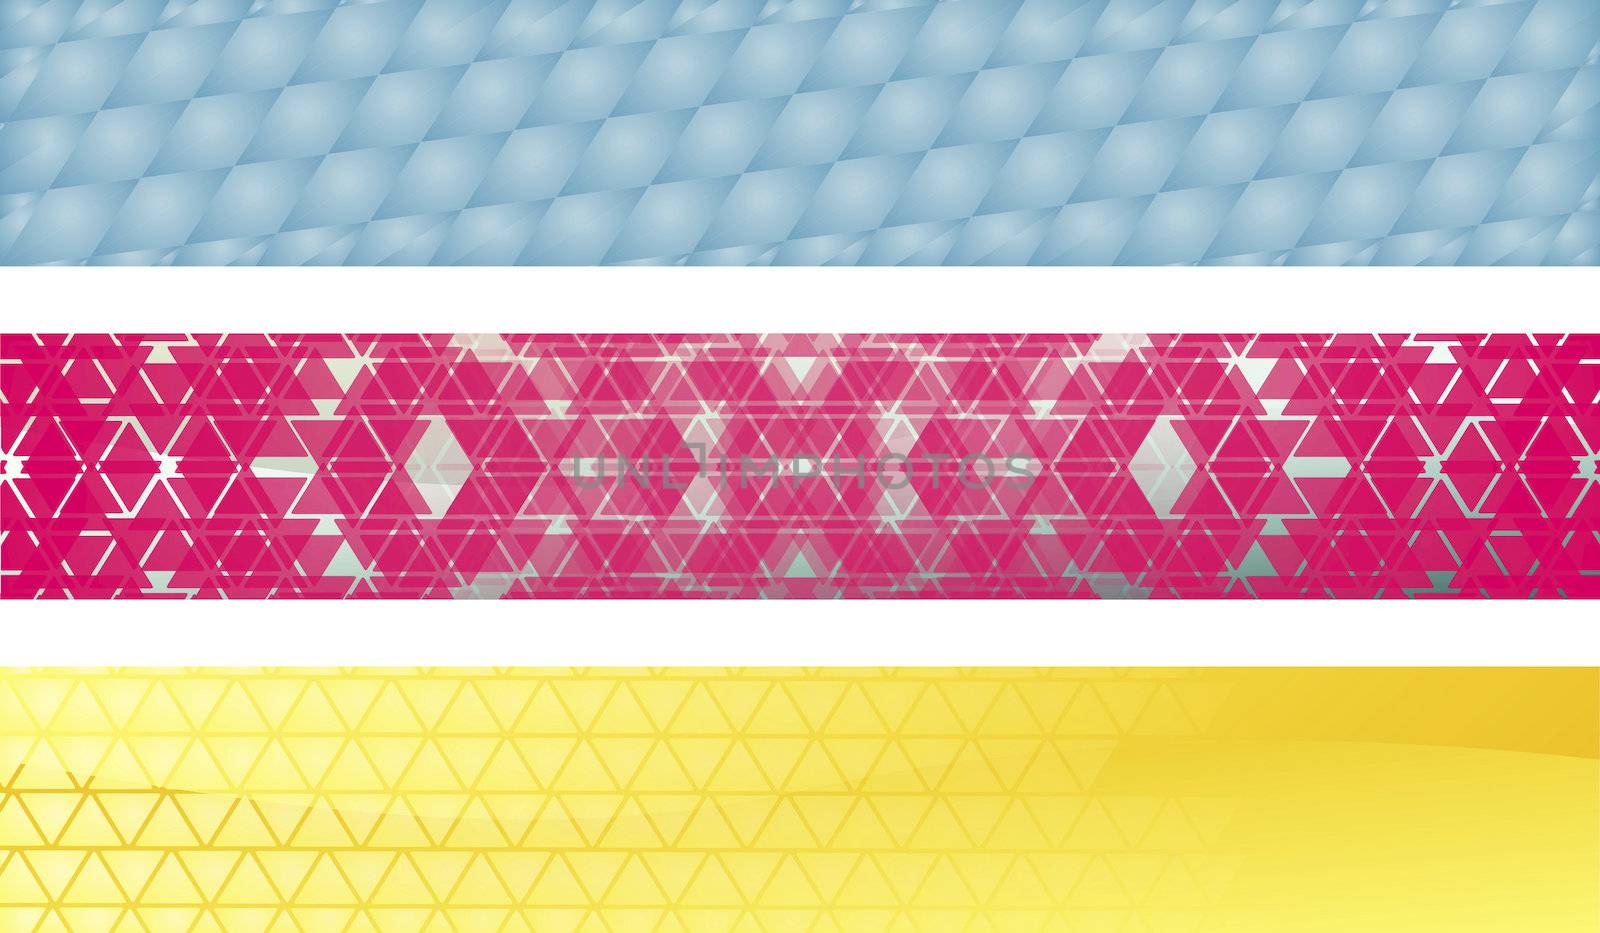 Three banners with triangles and rhombuses in blue, pink and yellow